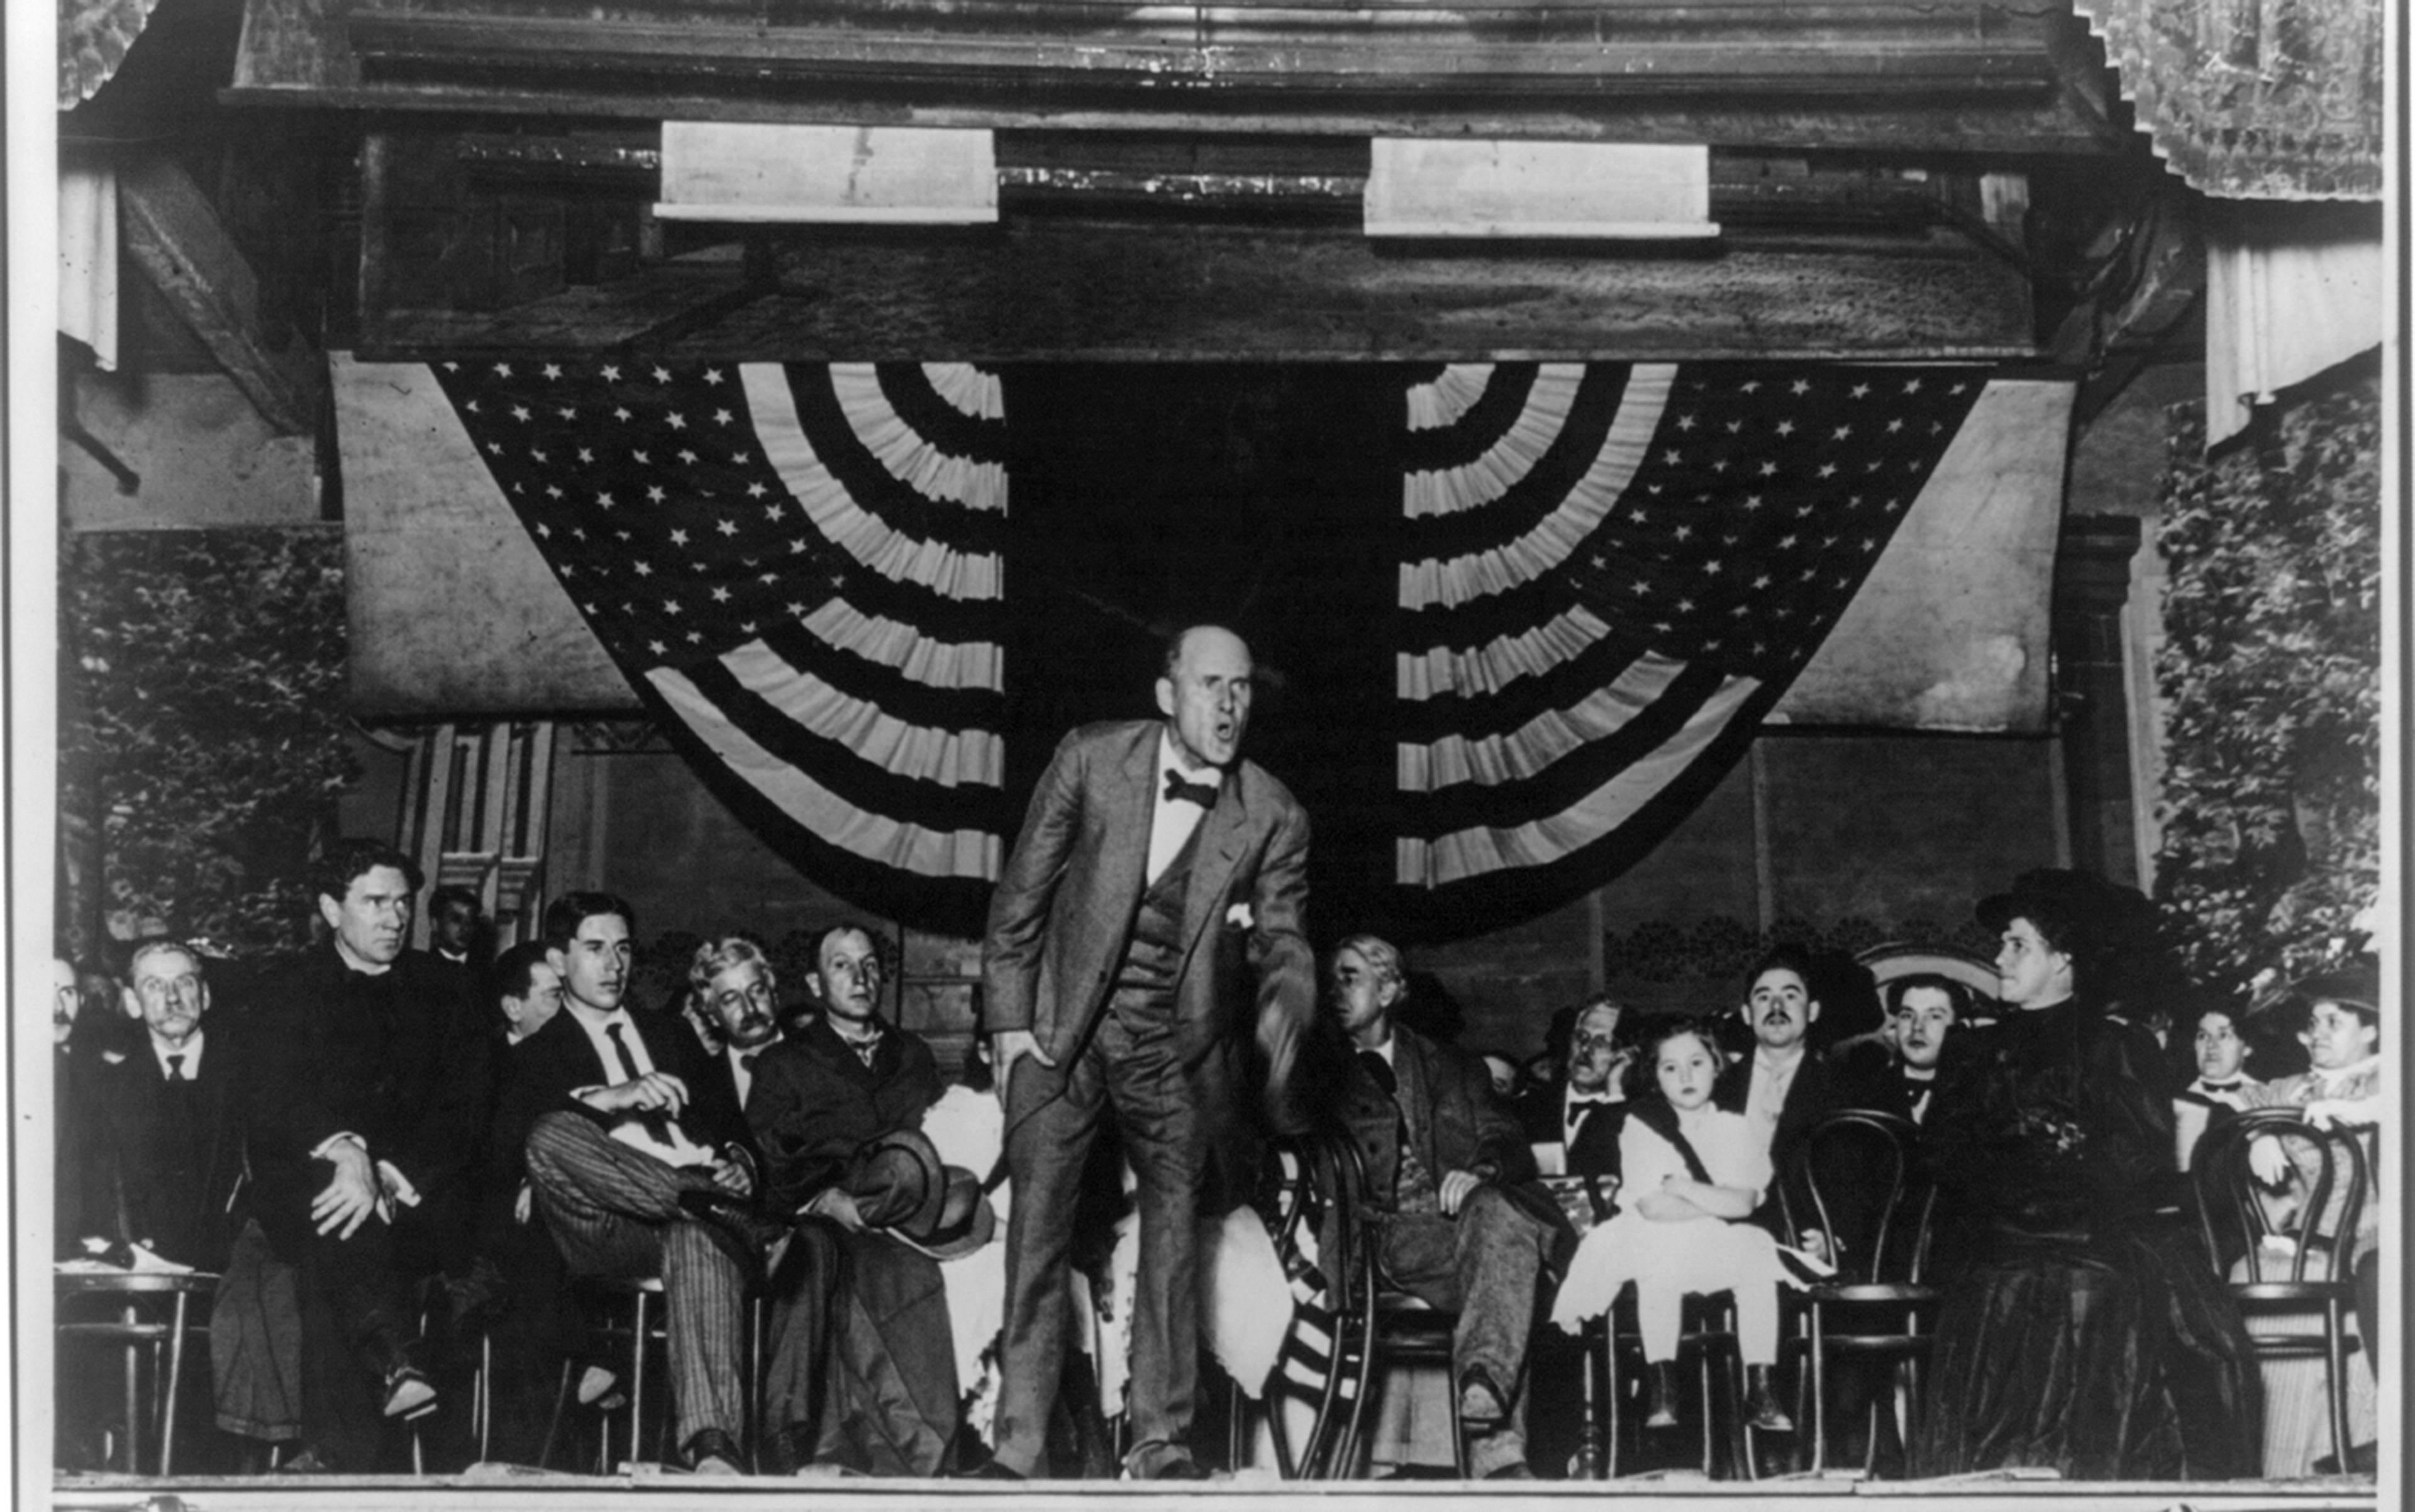 Eugene V Debs making a speech from a stage on which several other men, women and a young girl are seated behind him; also shows 48-star flags of the United States hanging at the back of the stage